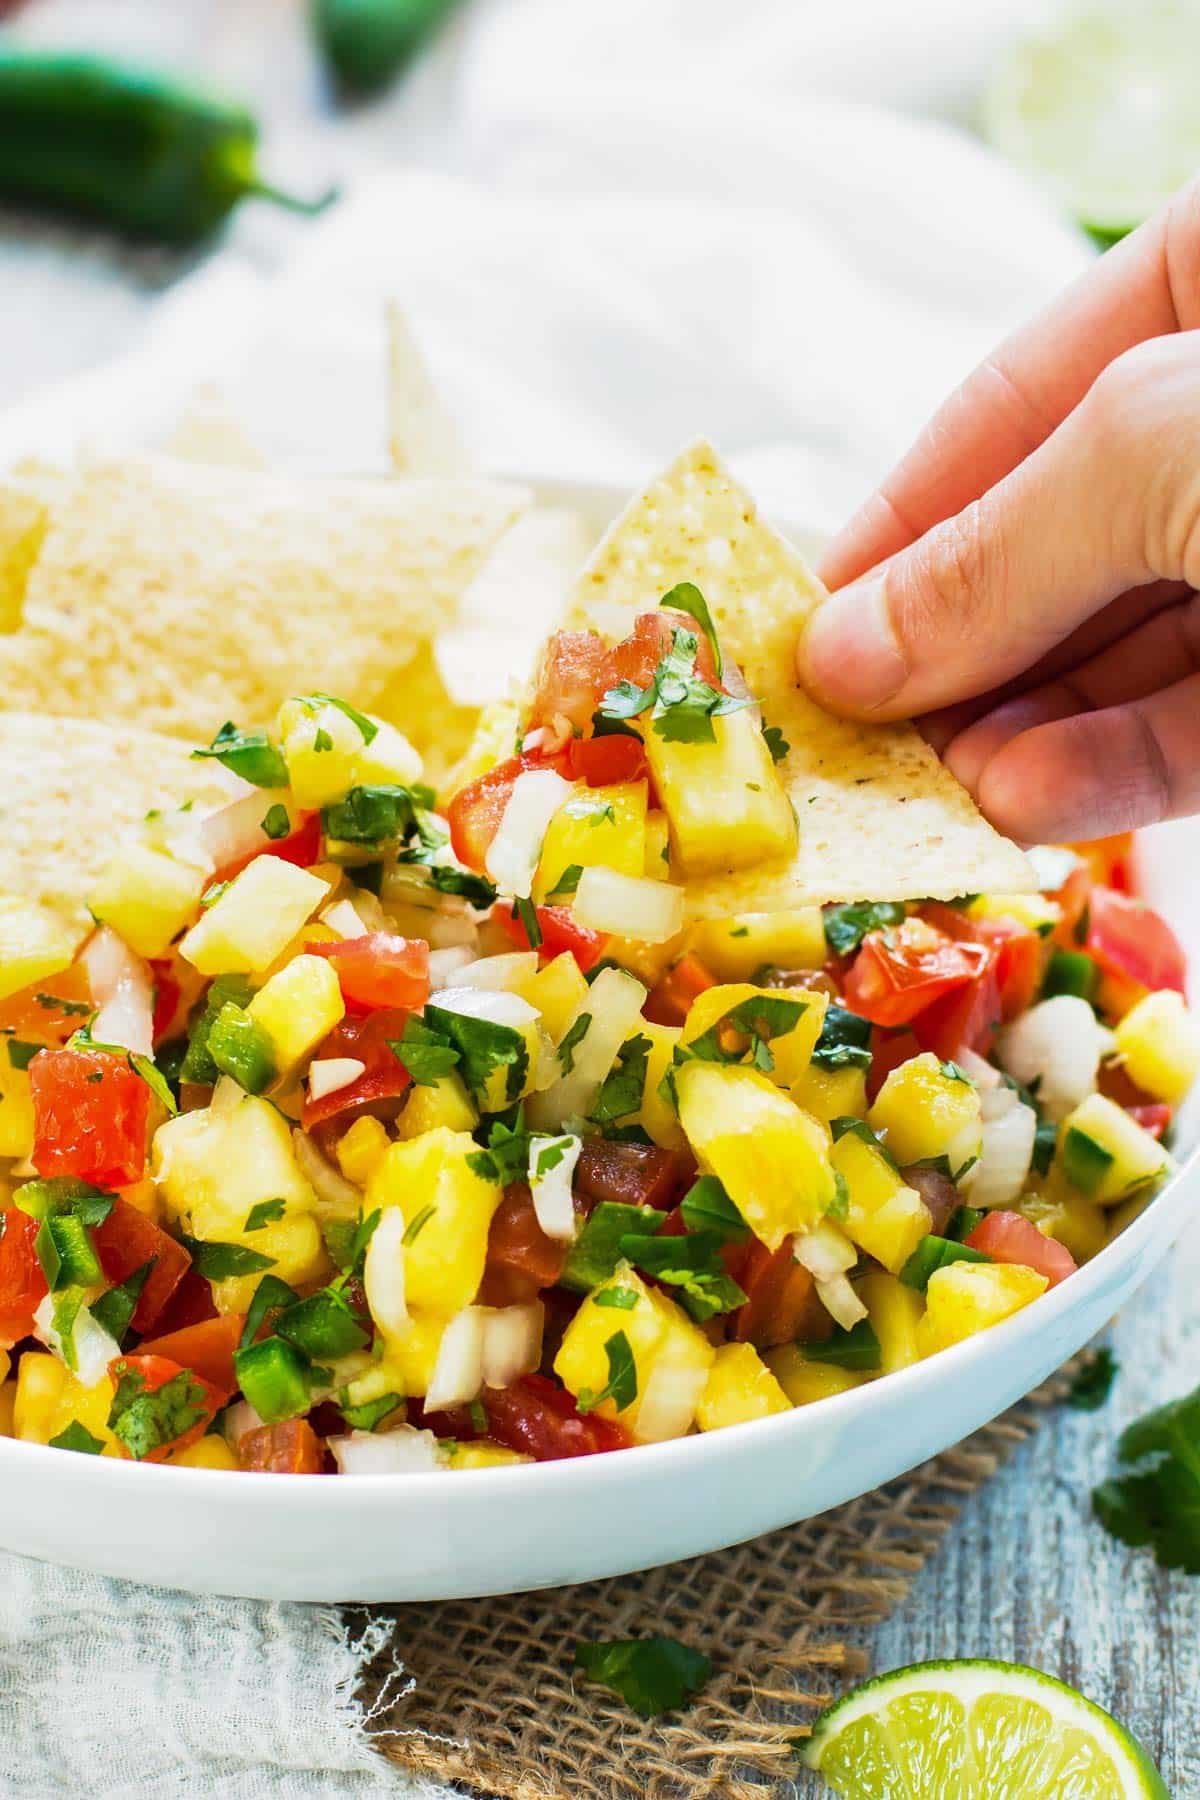 A hand using a tortilla chip to scoop a serving of a Pineapple Pico de Gallo recipe for lunch.